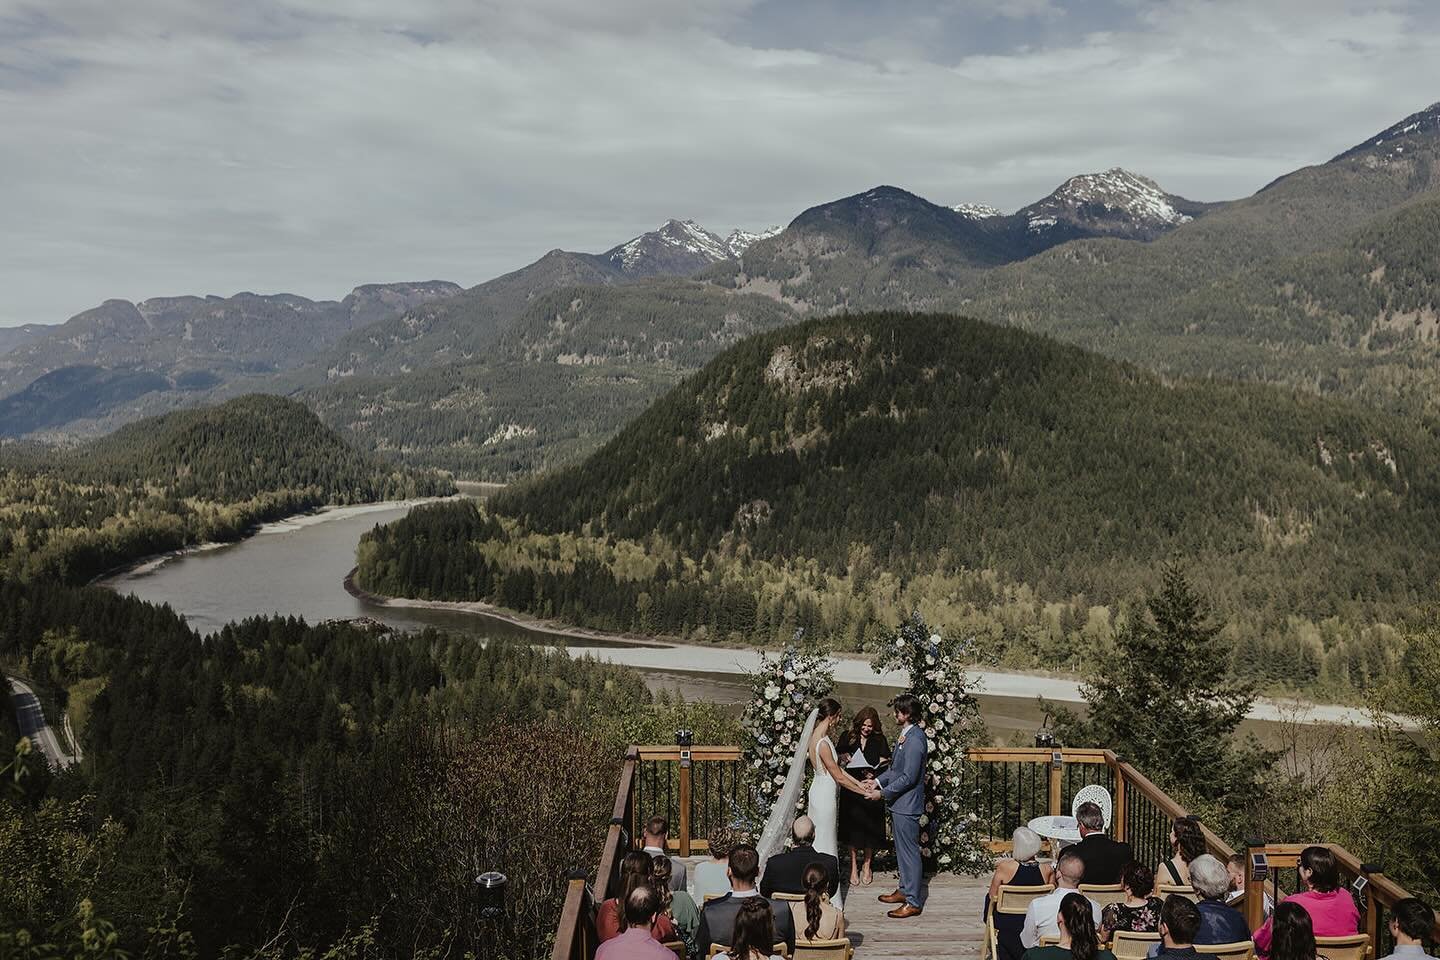 The views at @americancreeklodge will never loose the magic!  A true west coast backdrop with beauty at every turn ⛰️

📷 @theapartmentphoto